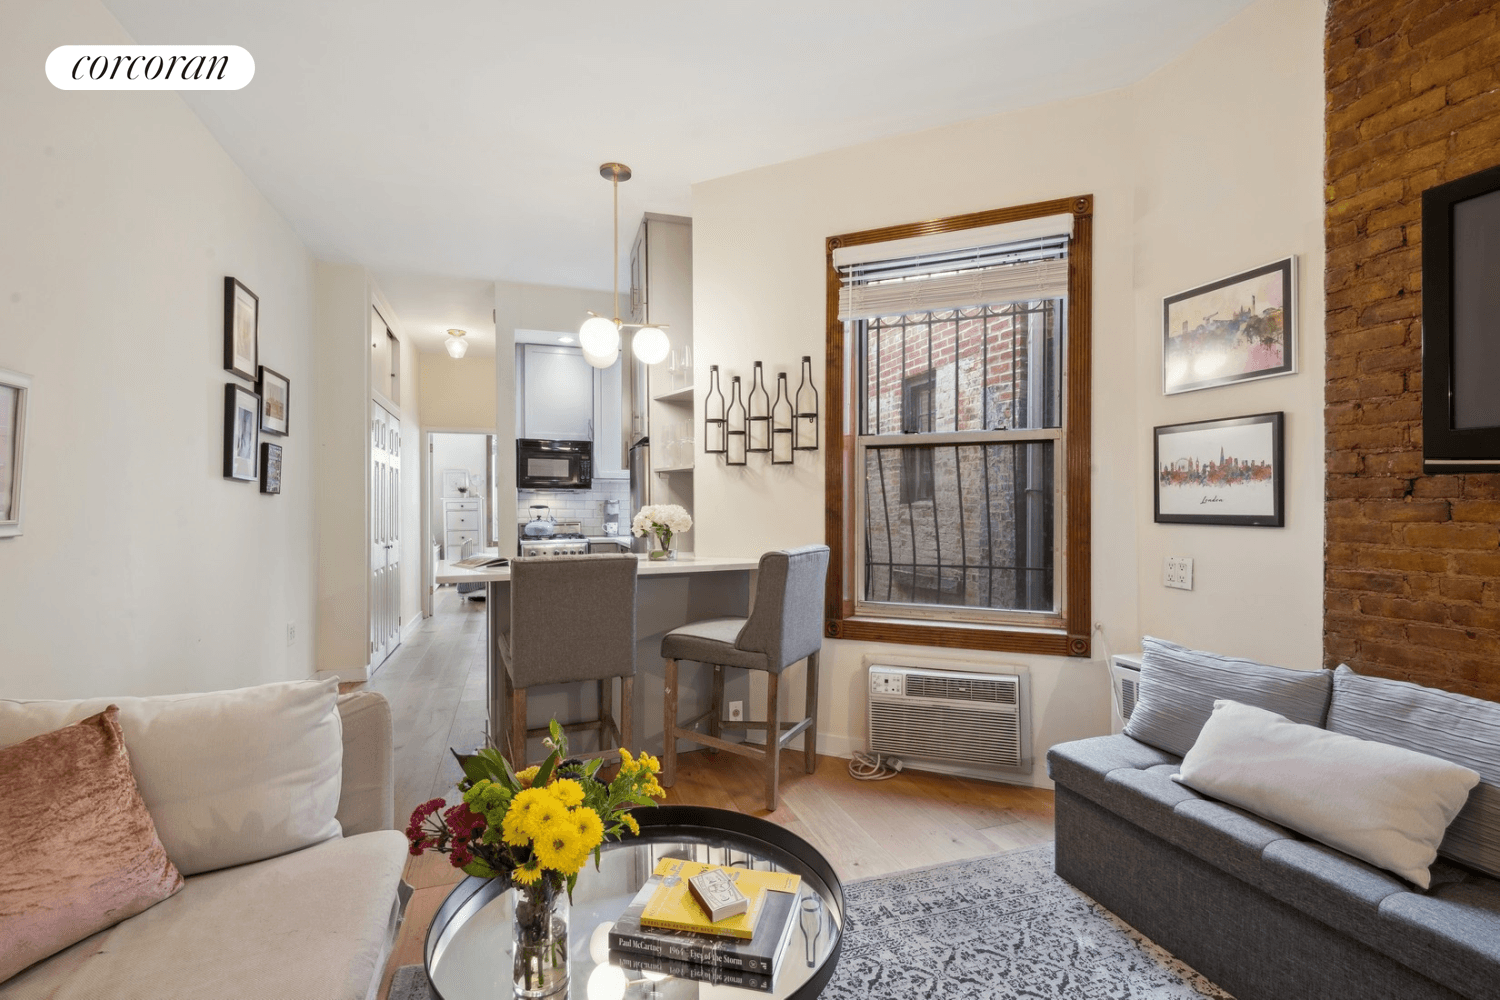 Your new one bedroom home is located in the heart of the Upper East Side situatedbetween Central Park and the East River Esplanade.